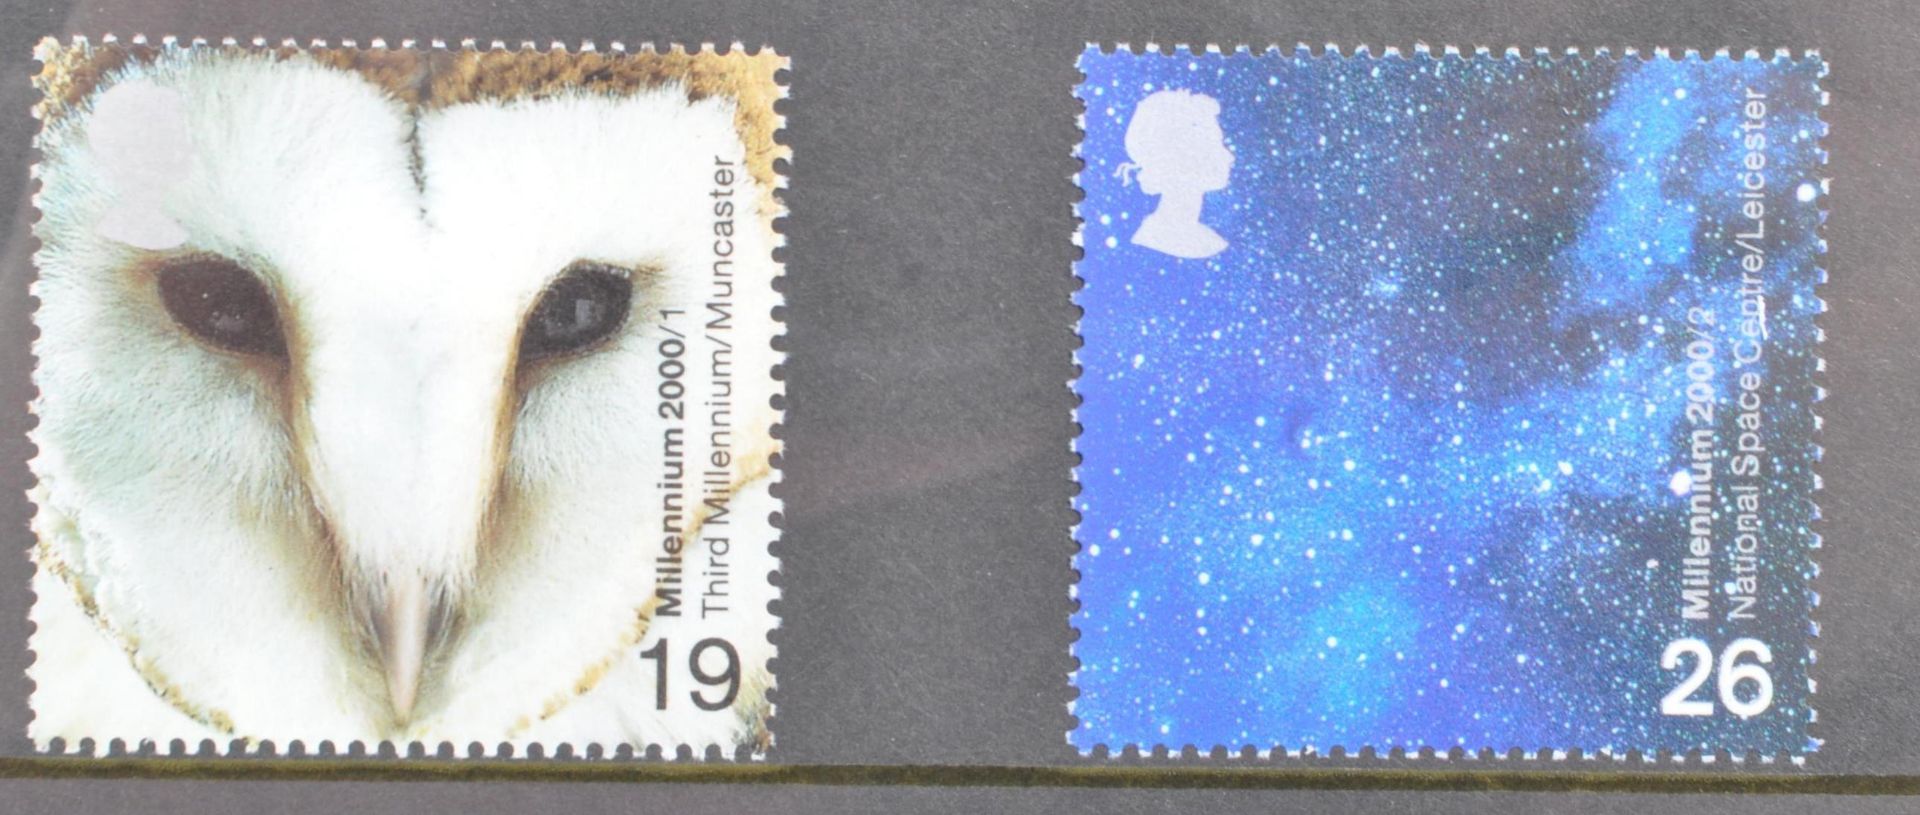 COLLECTION OF UNHINGED BRITISH POSTAGE STAMPS - Image 7 of 9